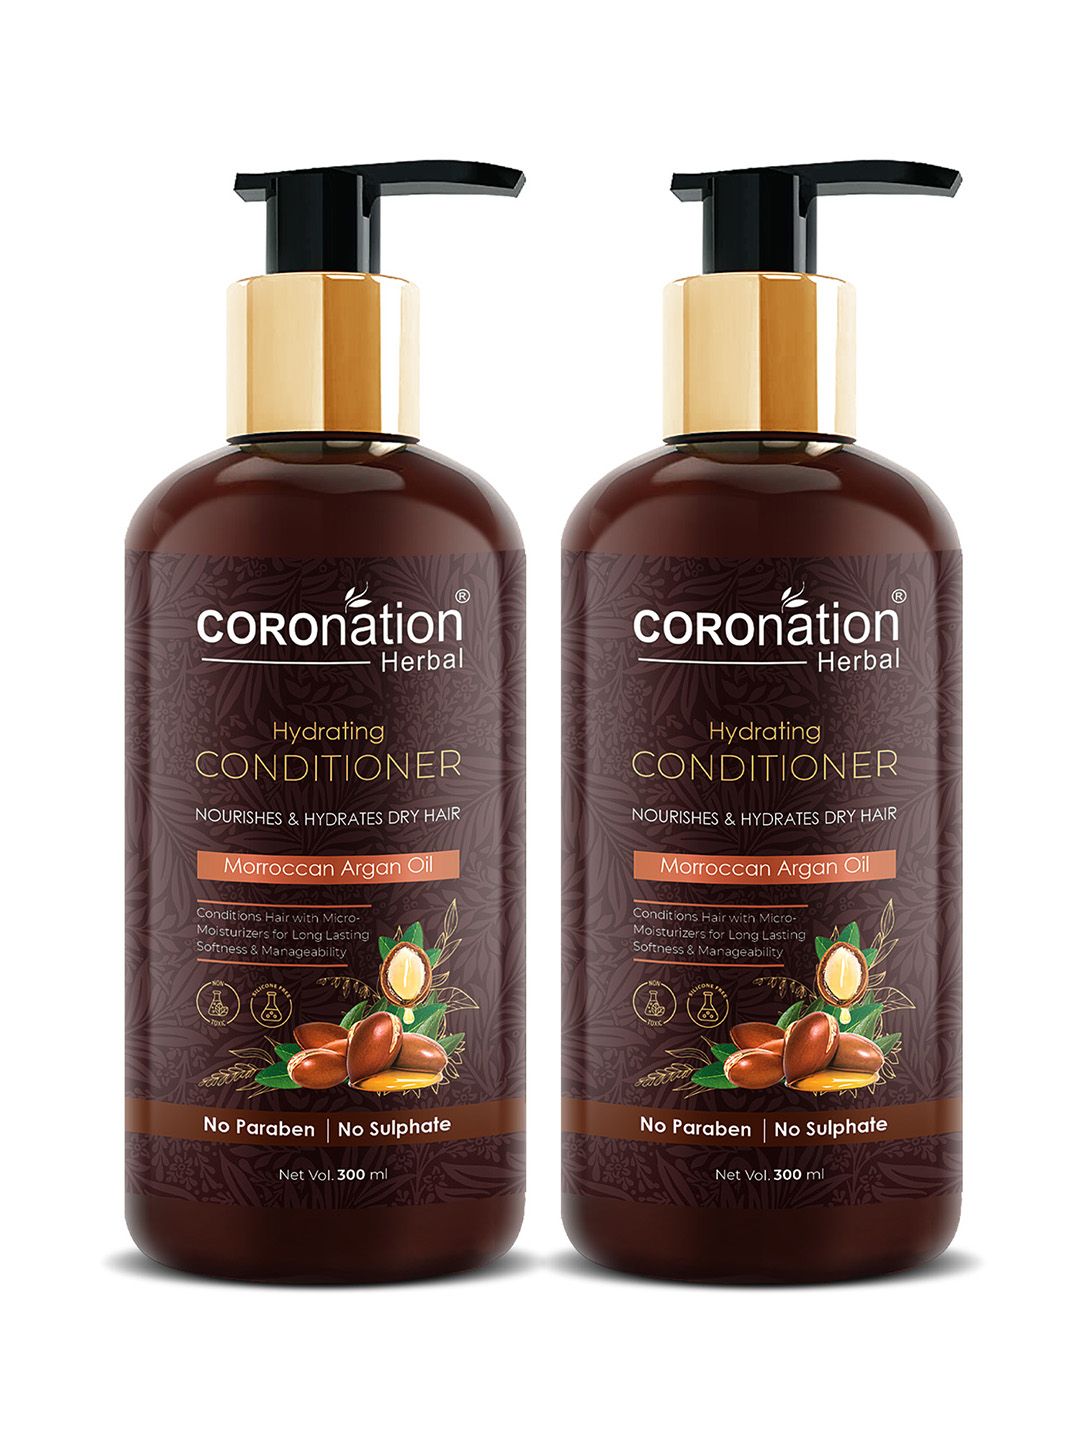 COROnation Herbal Set of 2 Hydrating Conditioner with Moroccan Argan Oil 300 ml each Price in India